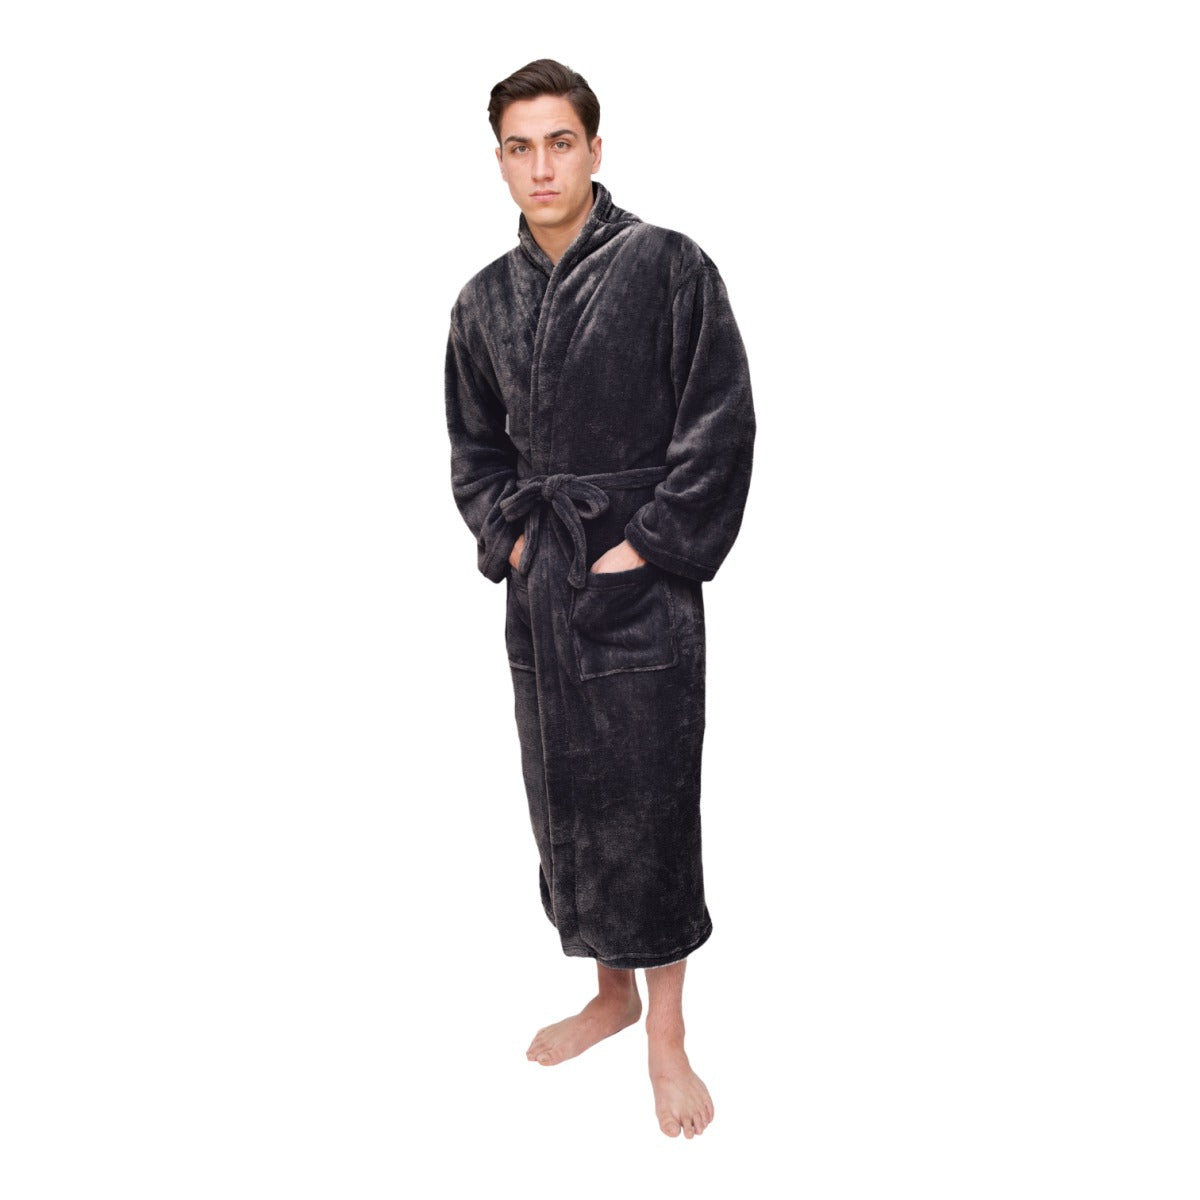 Custom Robes for Family - Grandfather